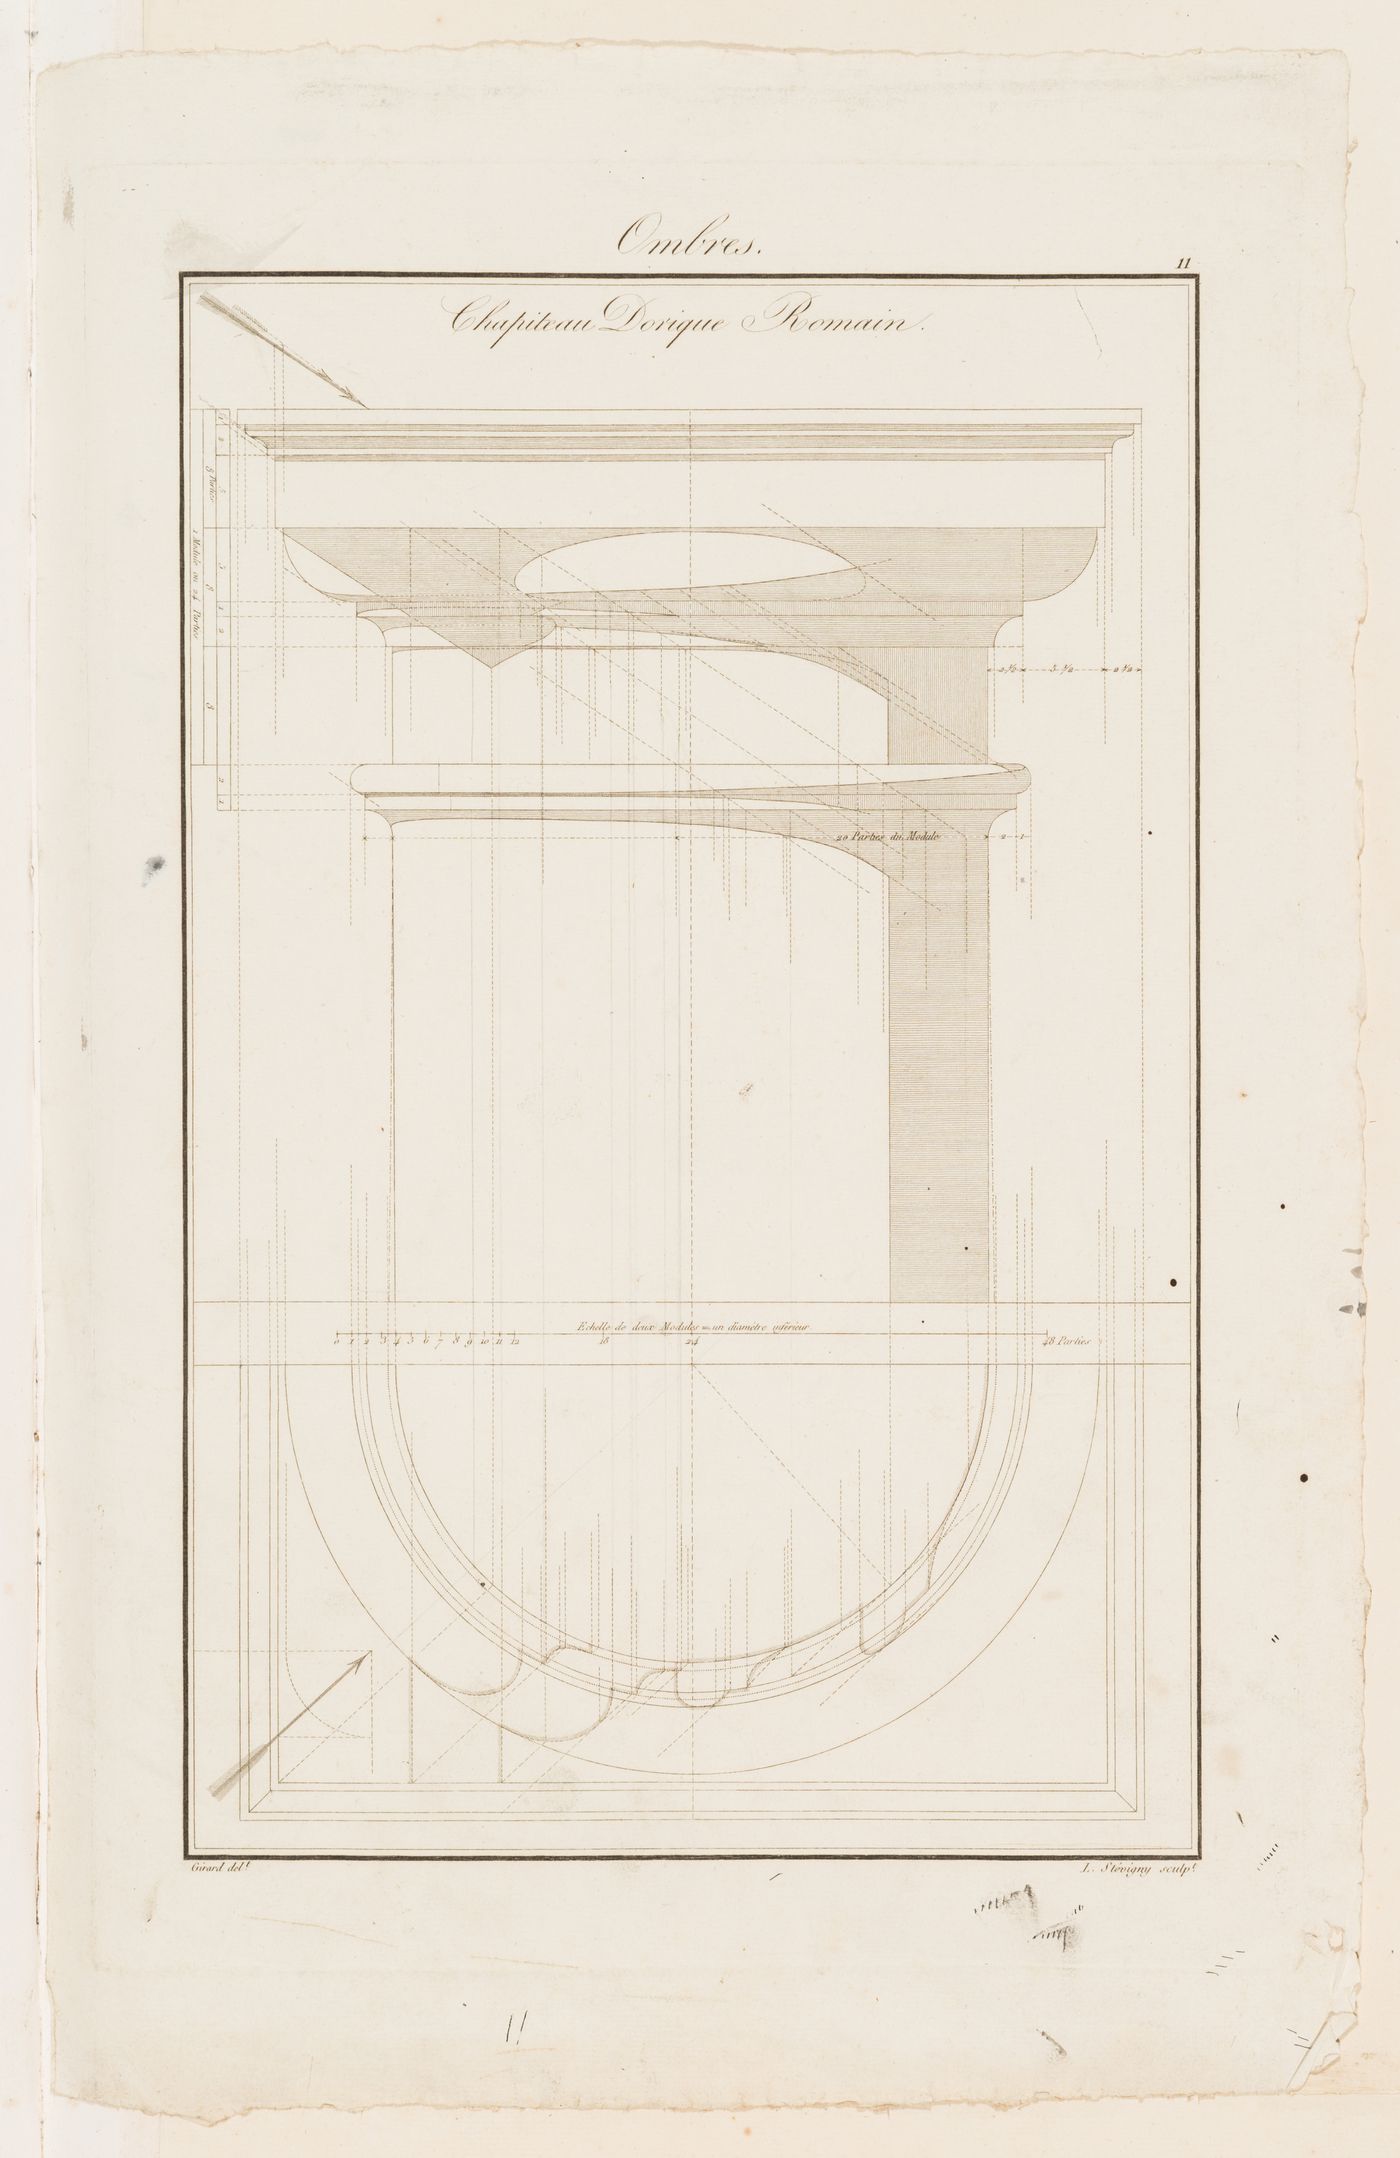 Elevation and plan of a Roman Doric capital with orthographic projecting lines indicating the distribution of light and shade